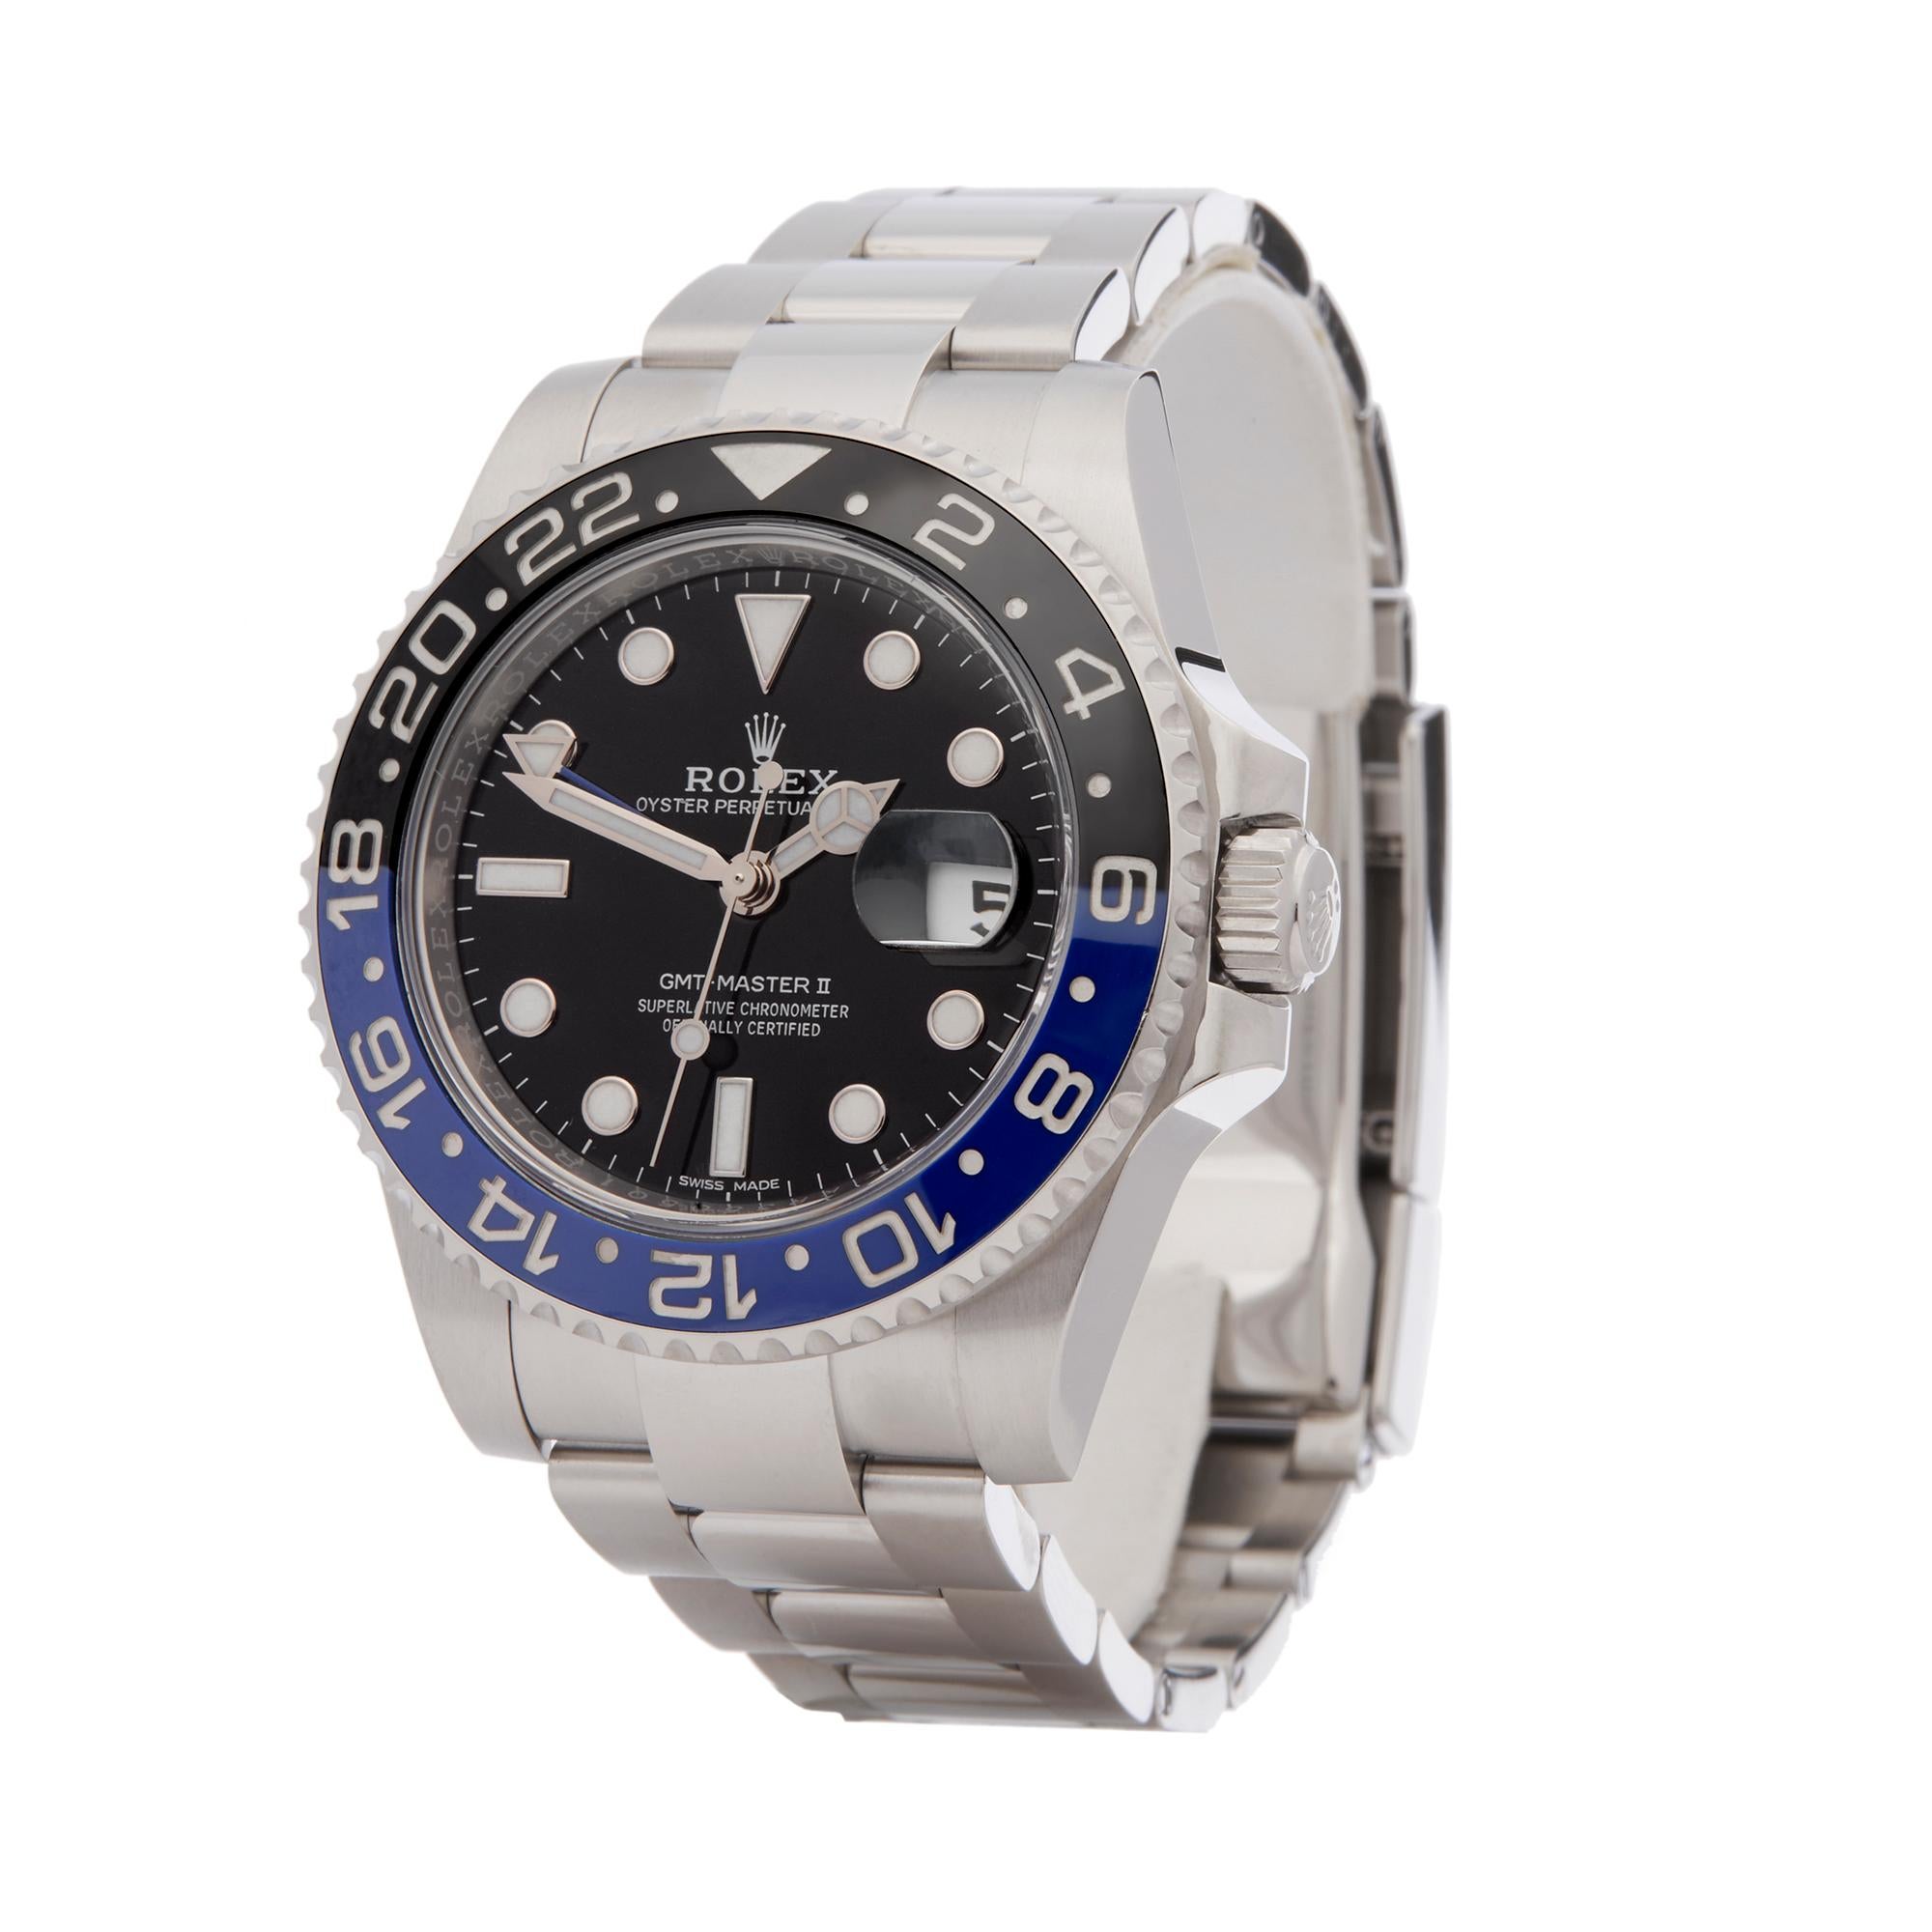 Ref: COM2216
Manufacturer: Rolex
Model: GMT-Master II
Model Ref: 116710BLNR
Age: 2nd April 2016
Gender: Mens
Complete With: Box, Manuals & Guarantee
Dial: Black
Glass: Sapphire Crystal
Movement: Automatic
Water Resistance: To Manufacturers